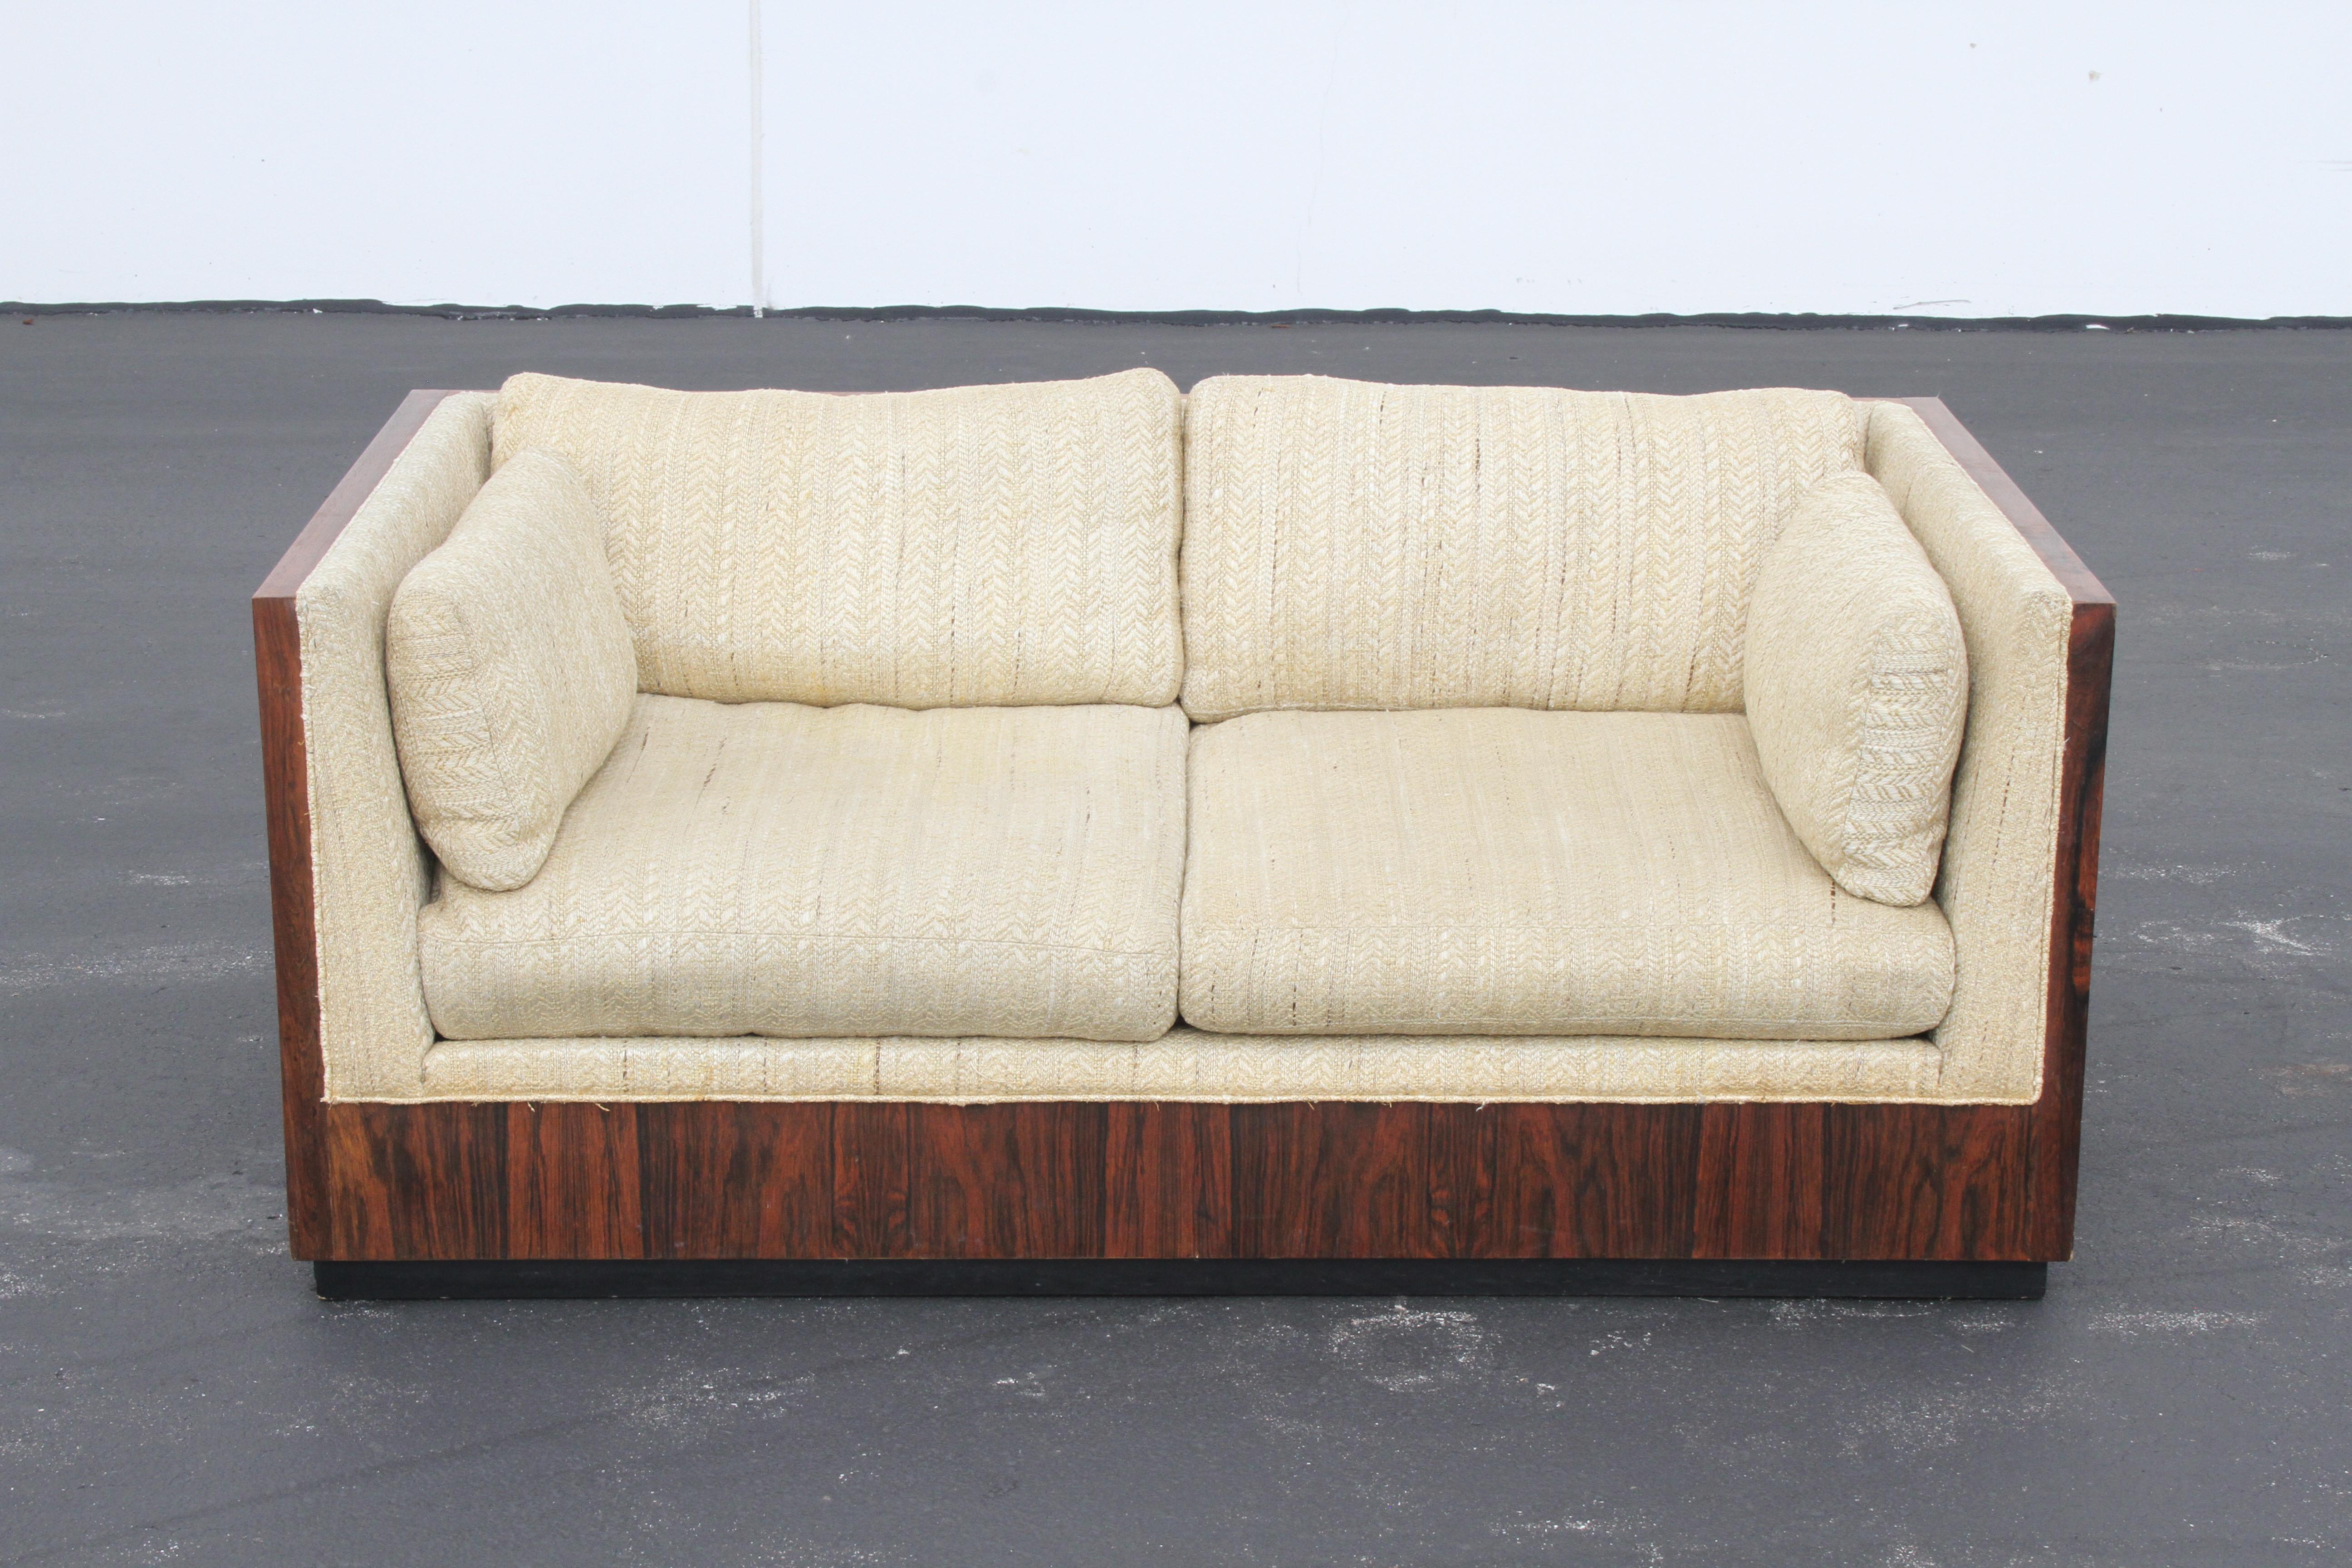 American Pair of Milo Baughman for Thayer-Coggin Rosewood Settees, Loveseats or Sofas